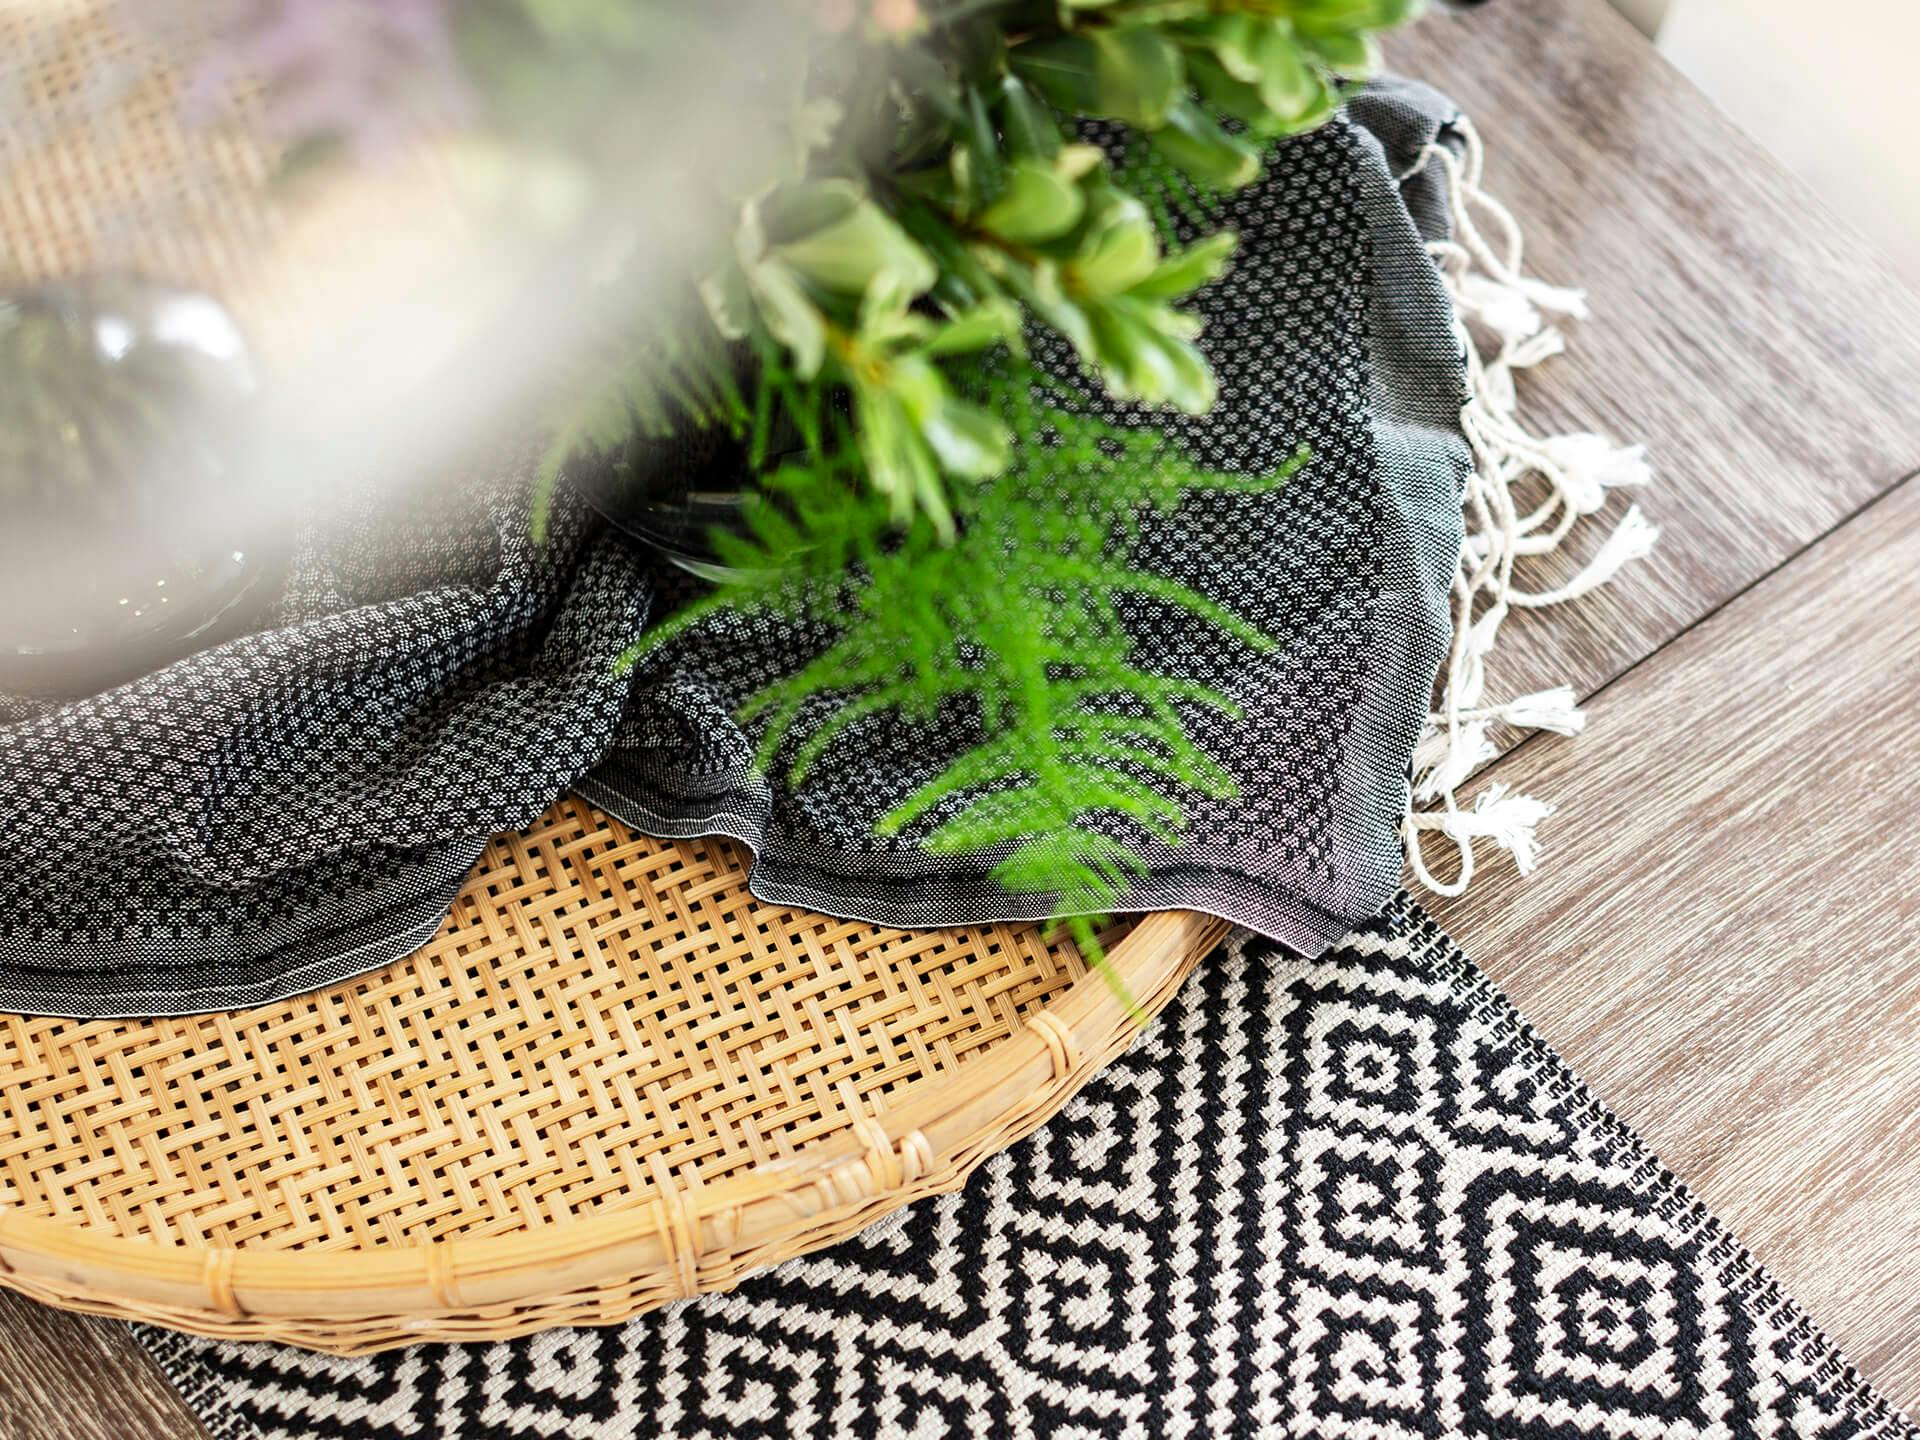 Close up of a woven tray with two different blankets and plants